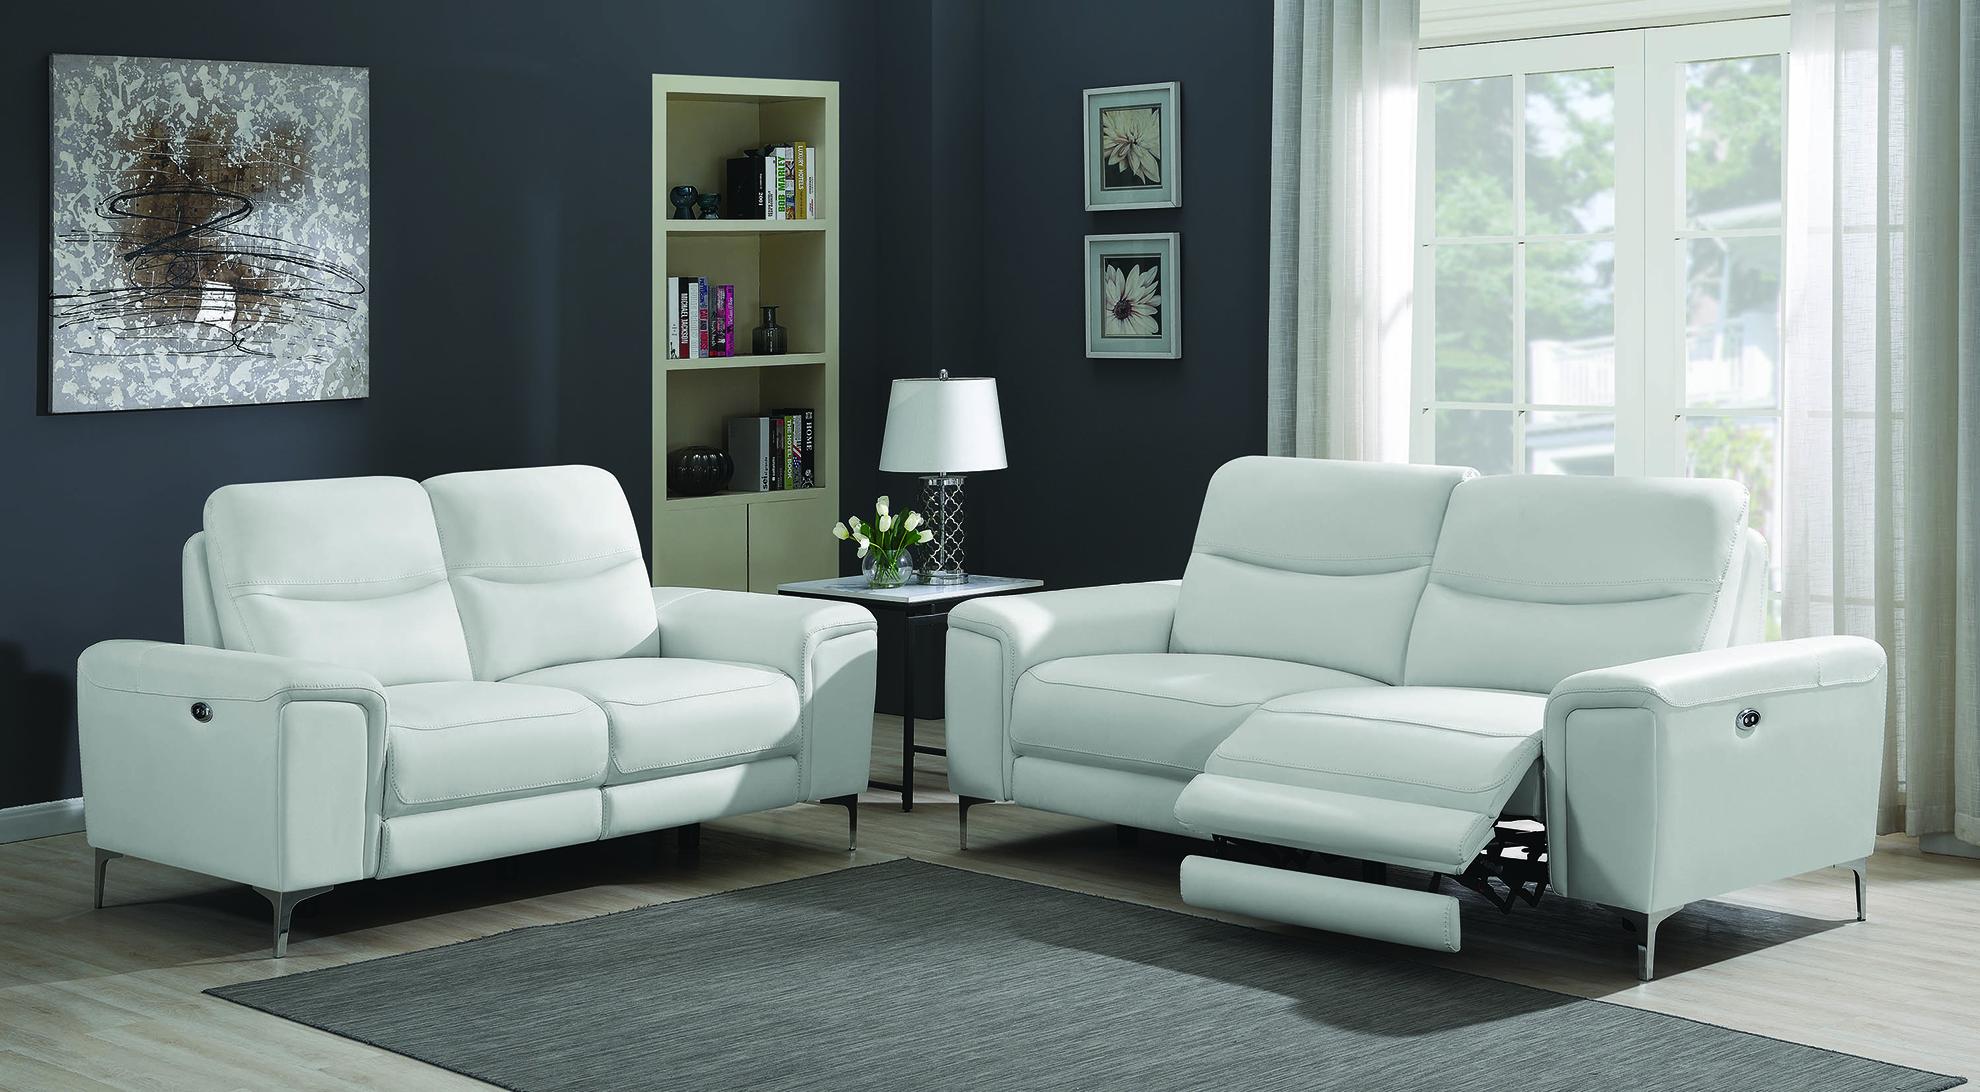 Contemporary Power Sofa Set 603394P-S2 Largo 603394P-S2 in White Leather